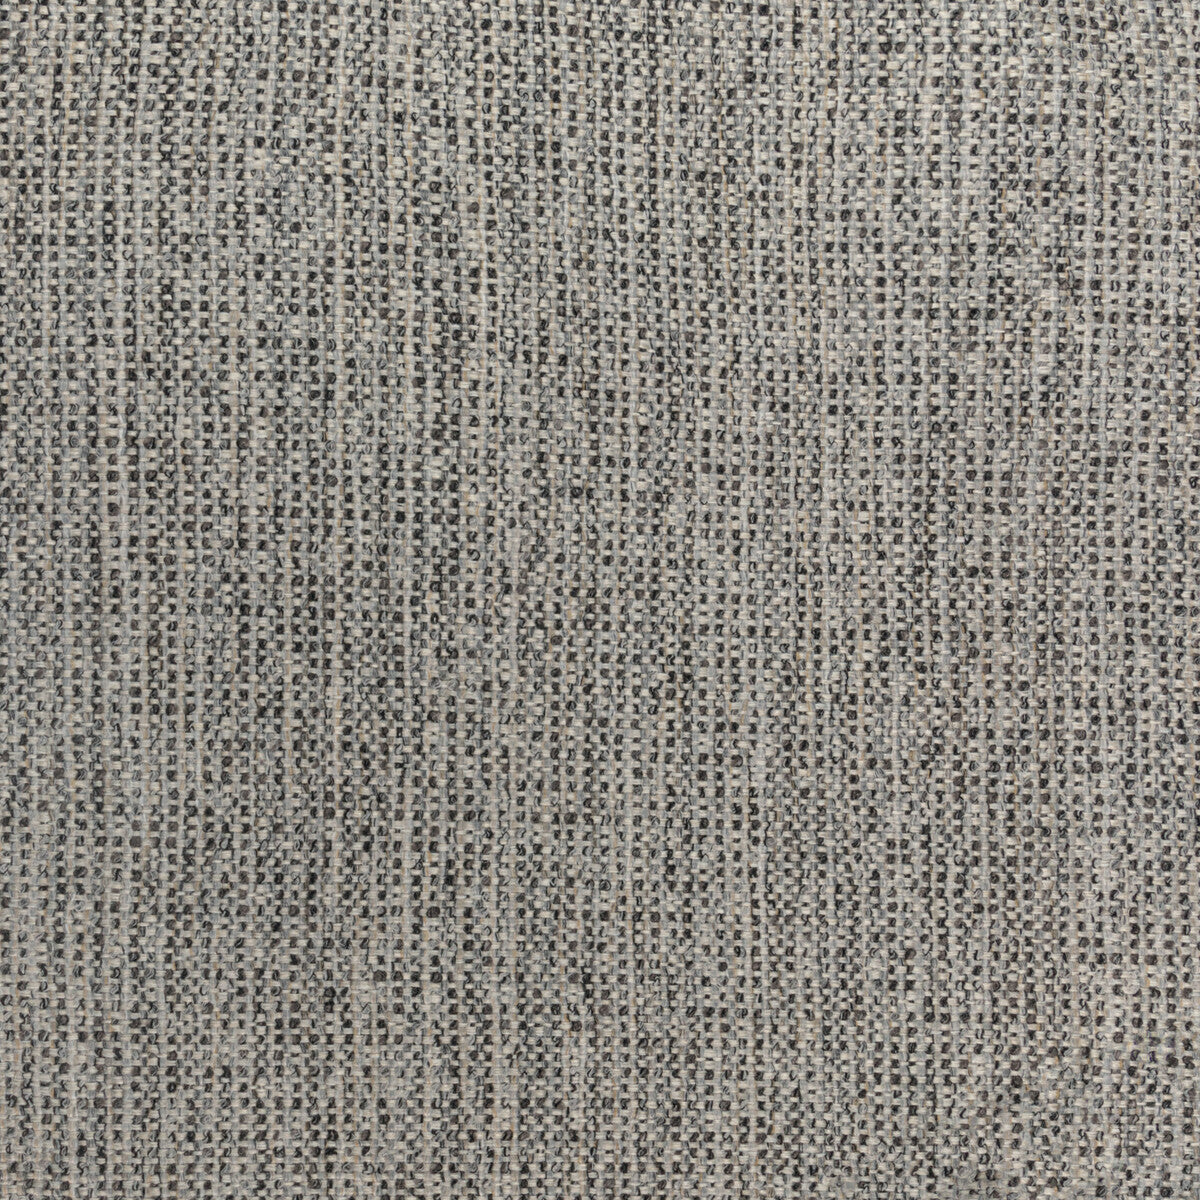 Kravet Smart fabric in 36301-811 color - pattern 36301.811.0 - by Kravet Smart in the Performance Crypton Home collection